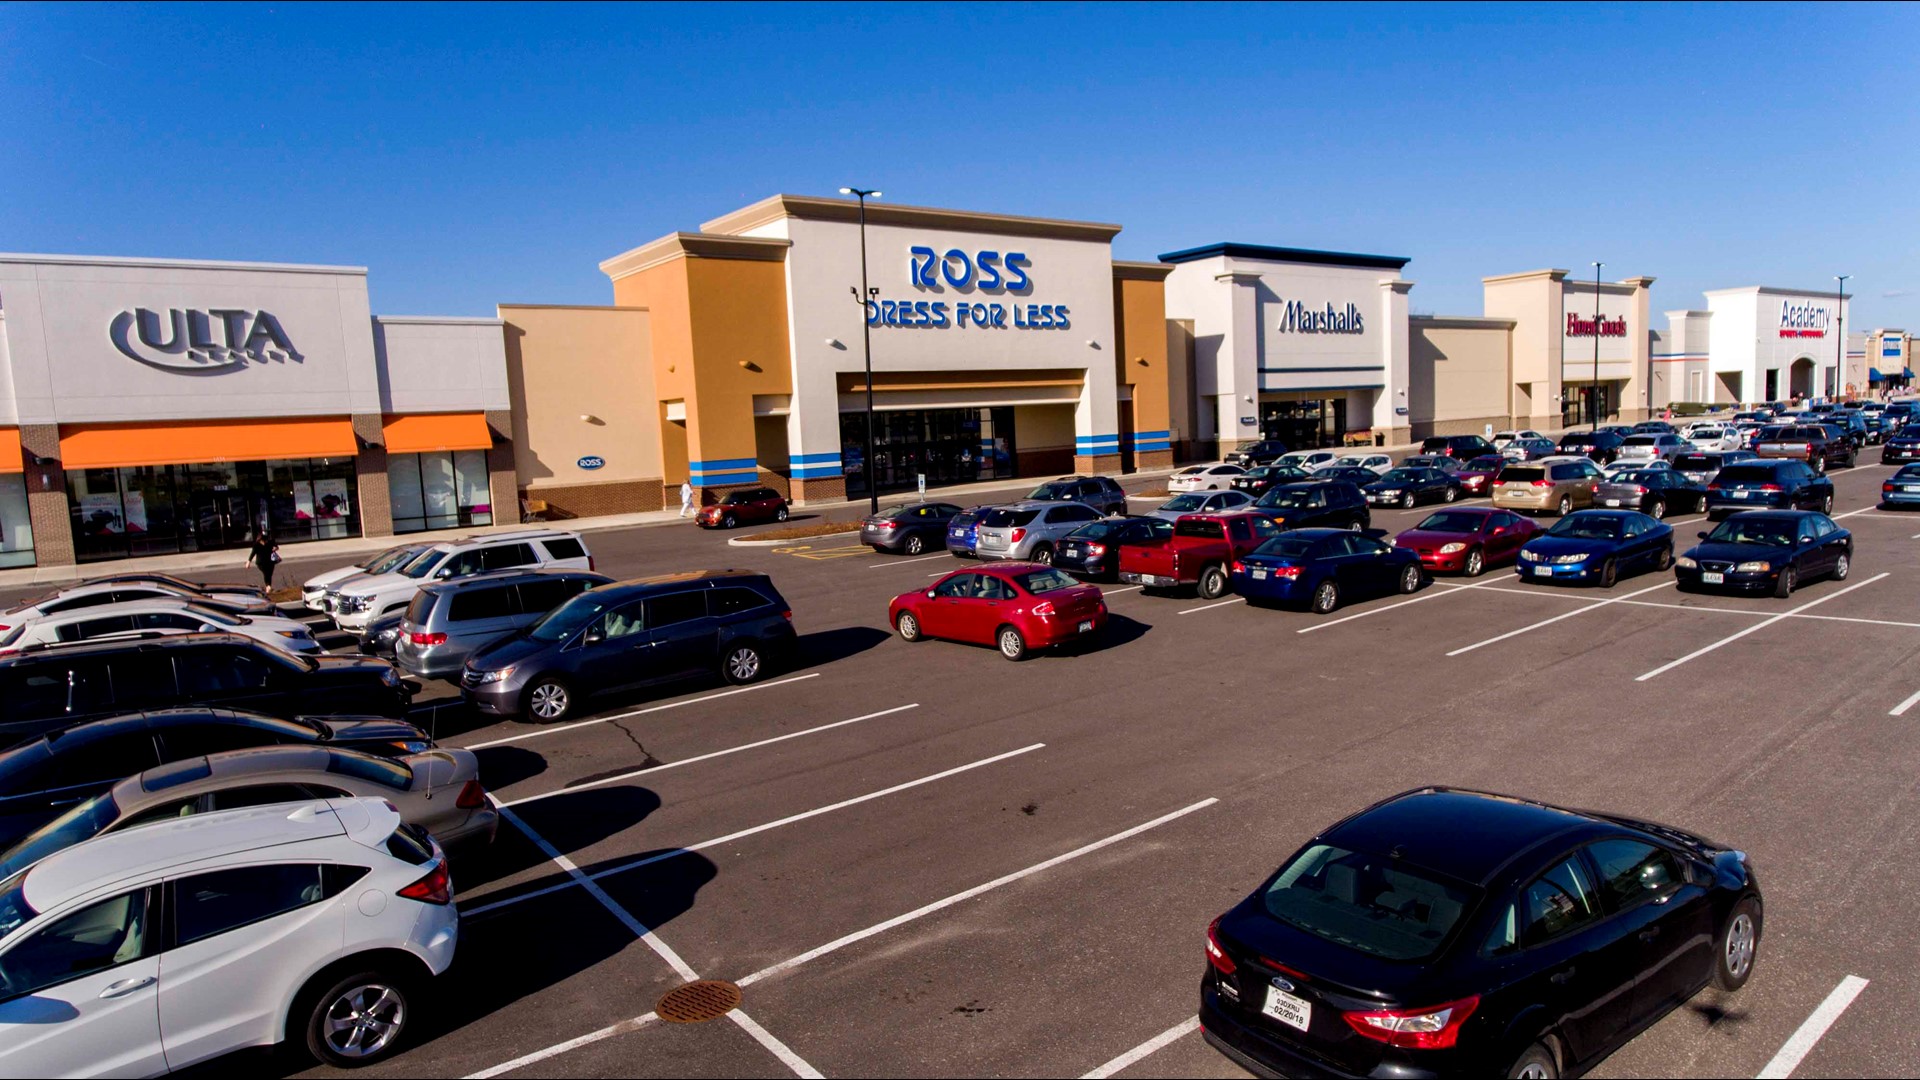 Ross Dress for Less has set a July 20 opening date for a new store in